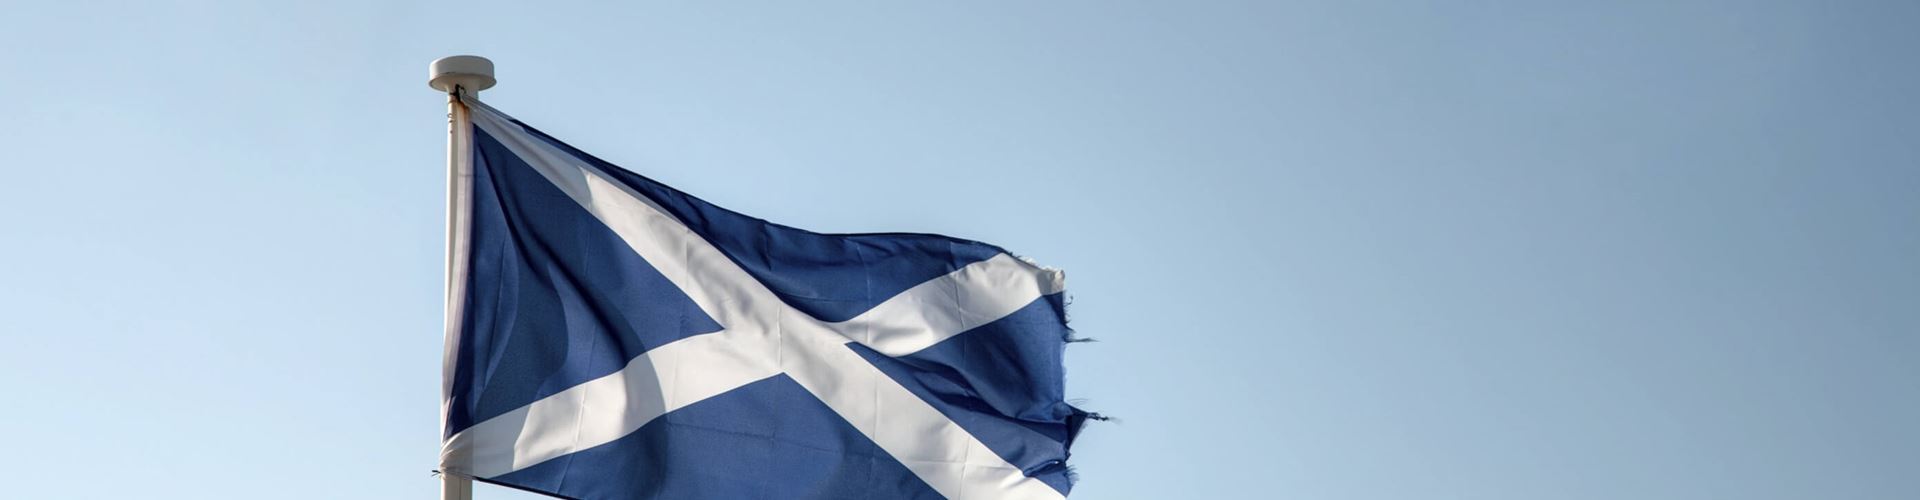 New Scotland tax rates may be bad for employers, say advisors